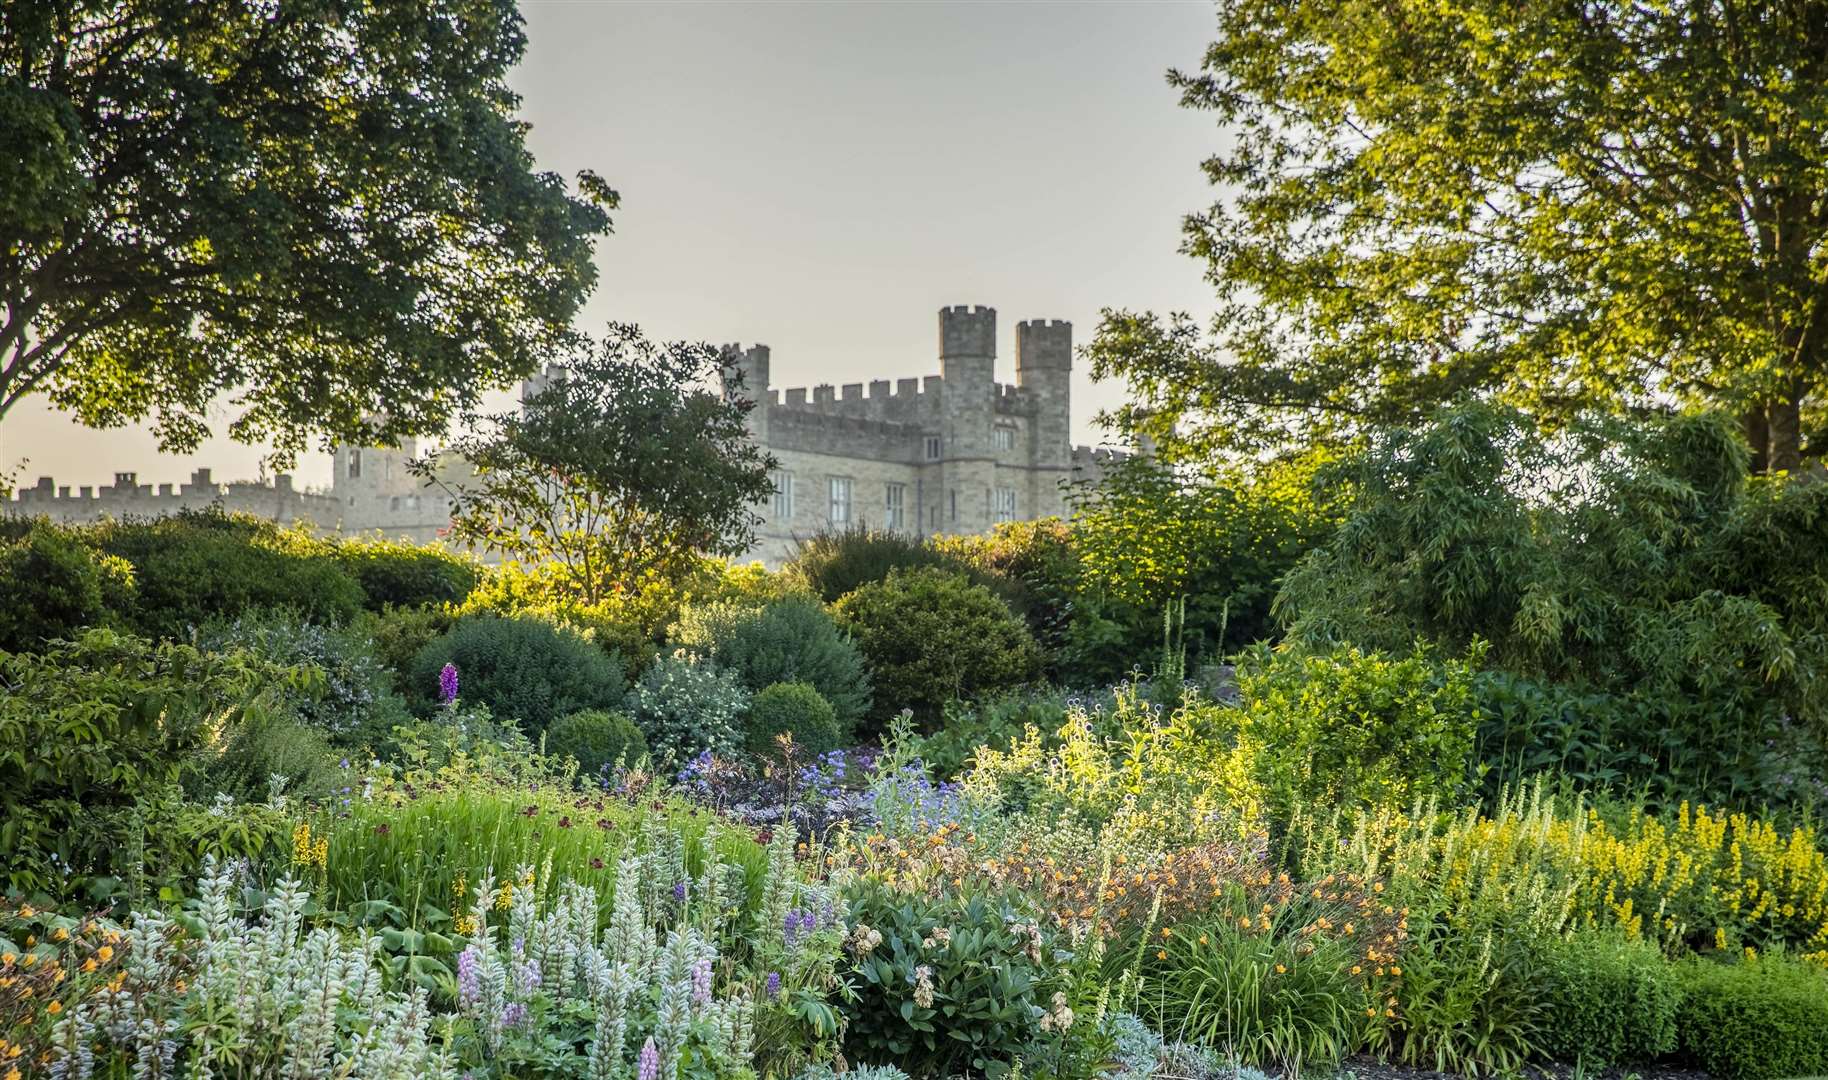 Take a tour of the breathtaking gardens at Leeds Castle. Picture: Thomas Alexander